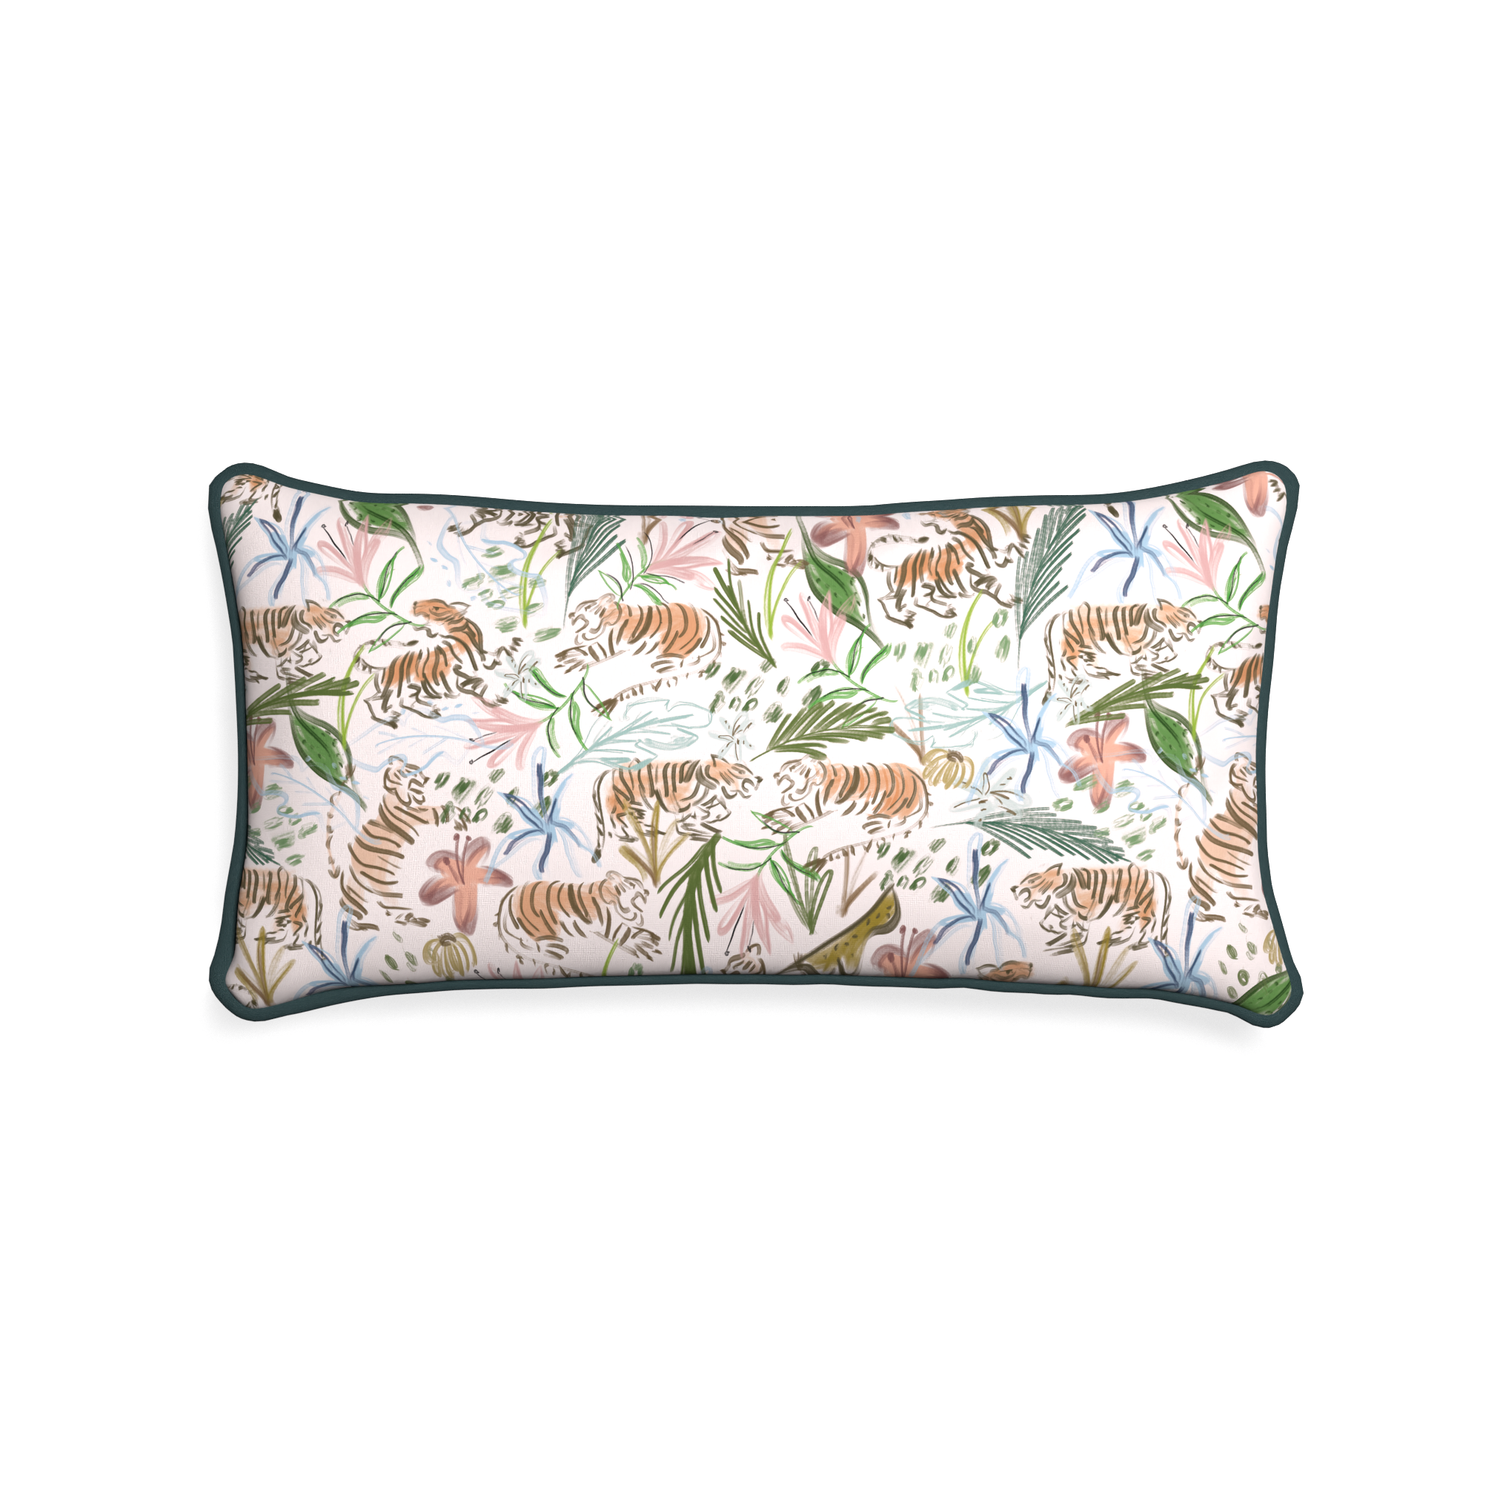 Midi-lumbar frida pink custom pink chinoiserie tigerpillow with p piping on white background